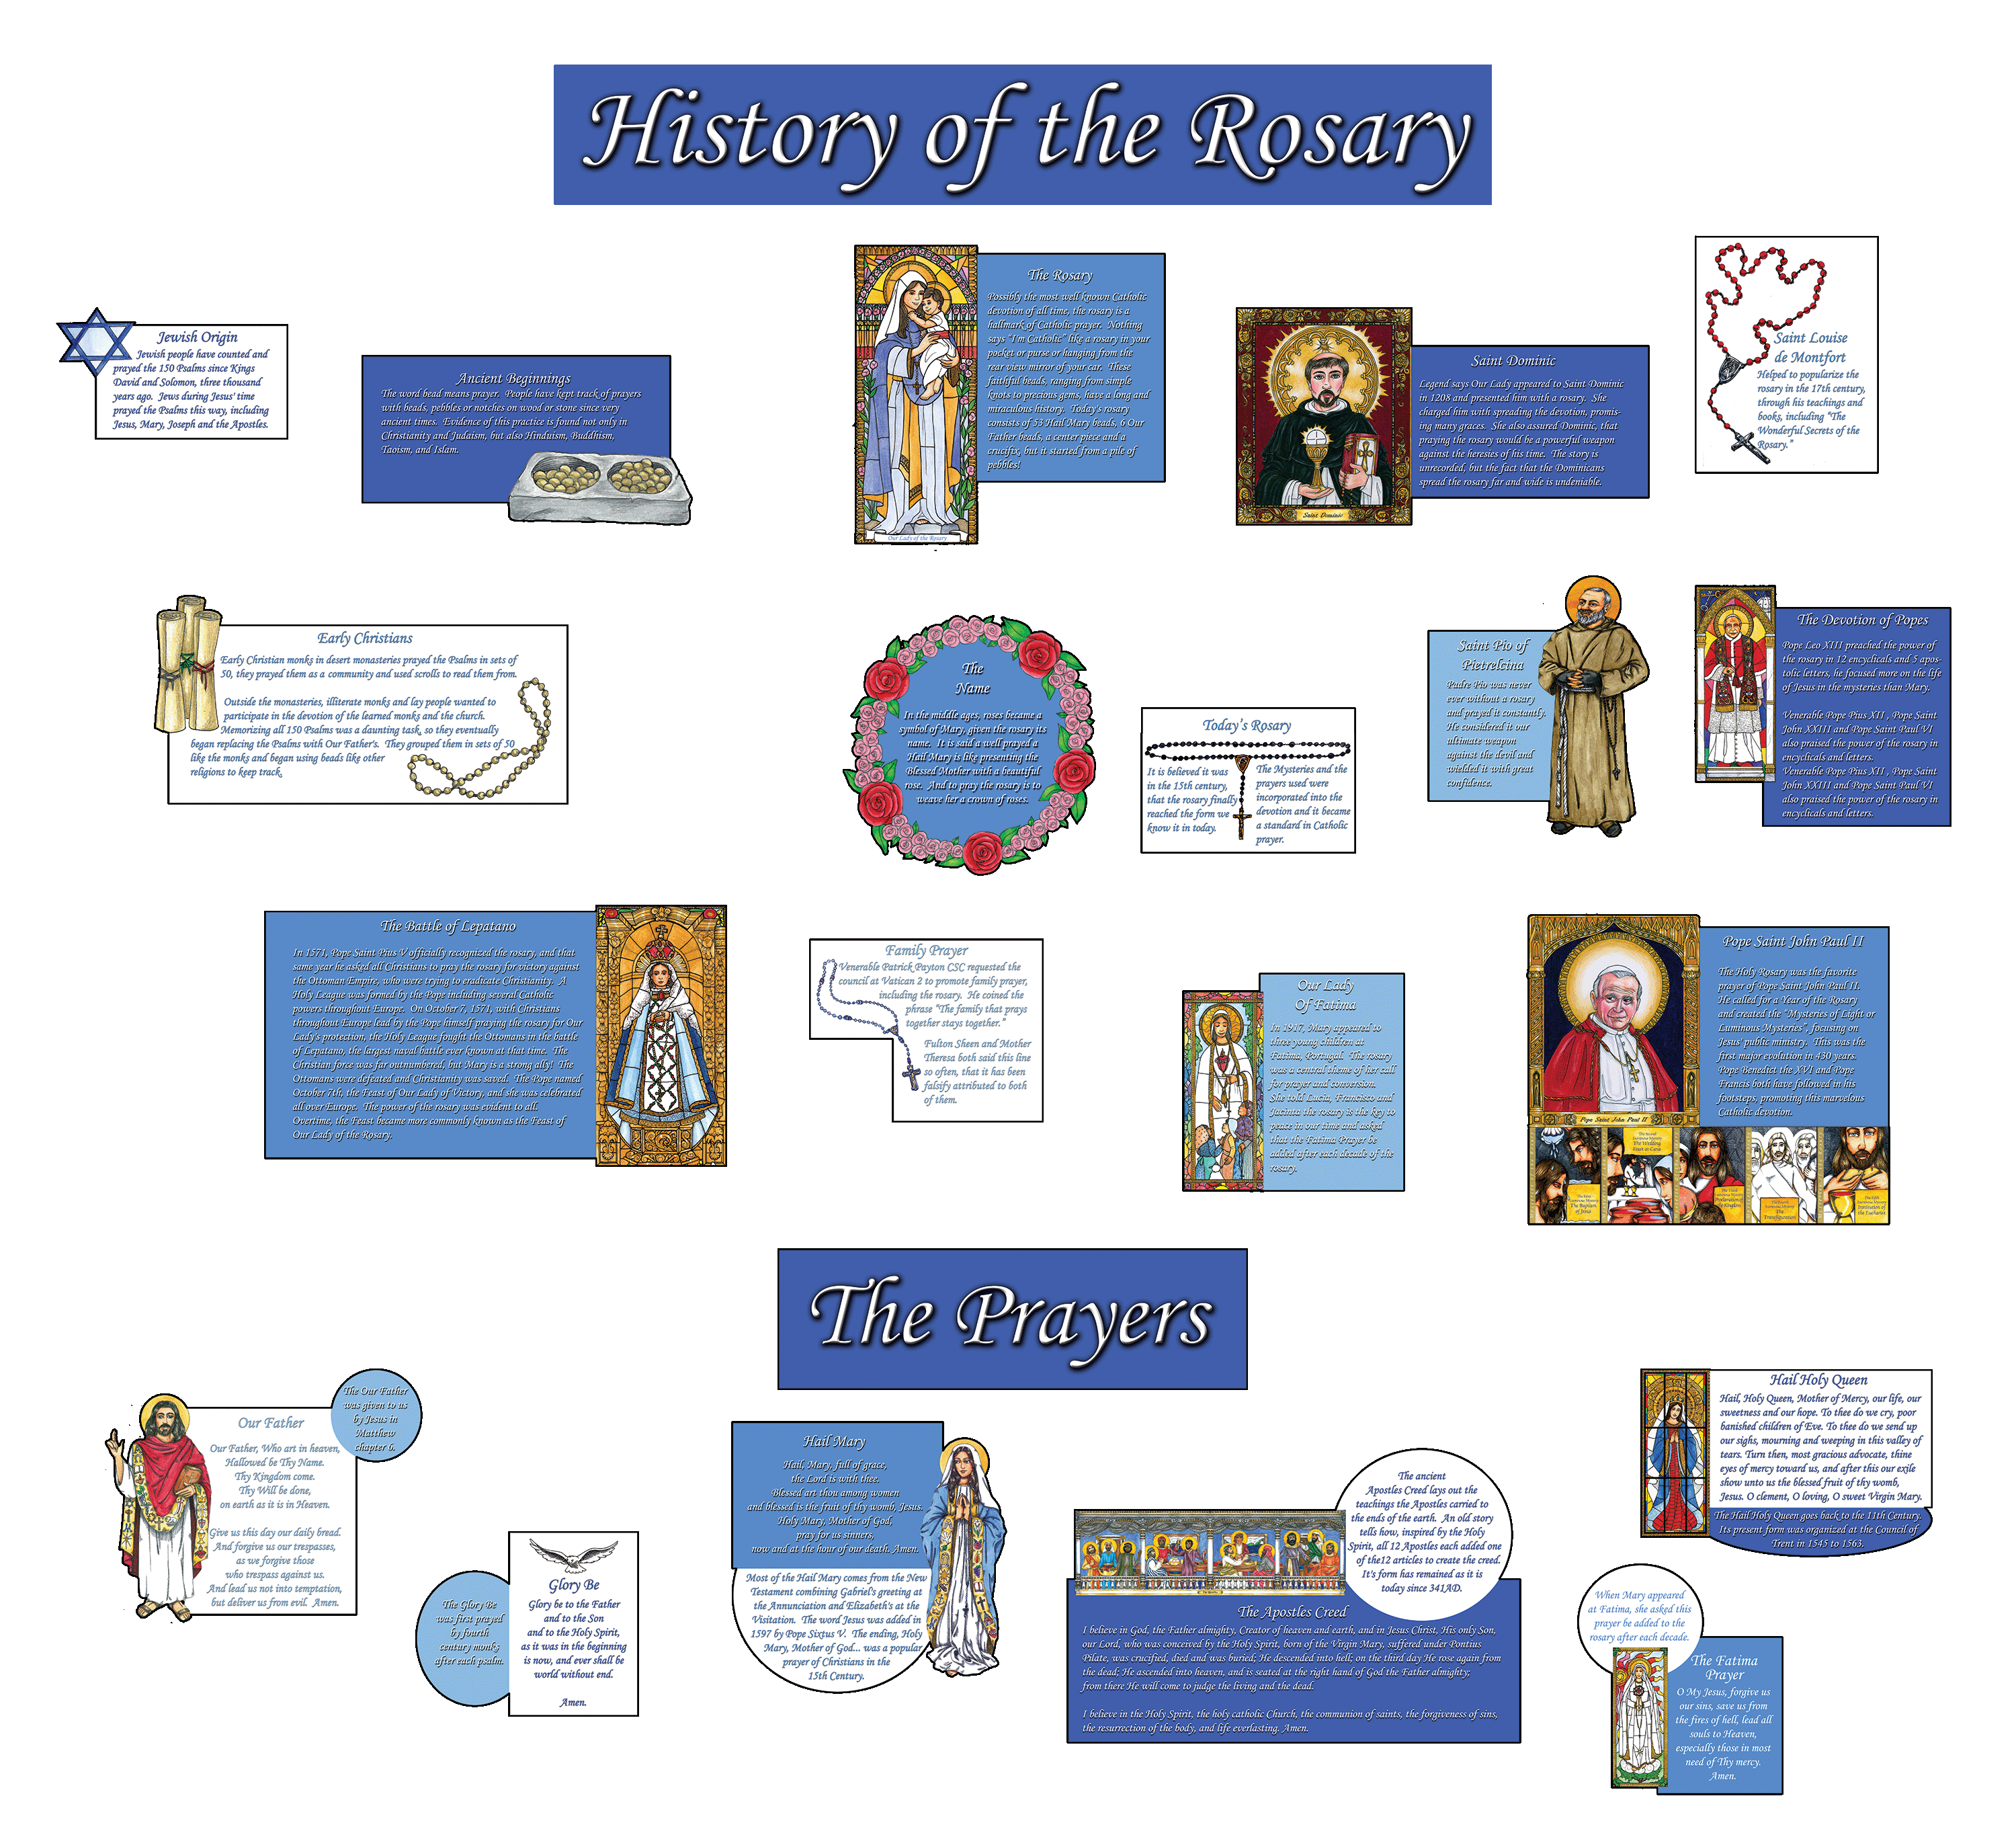 The History of the Rosary